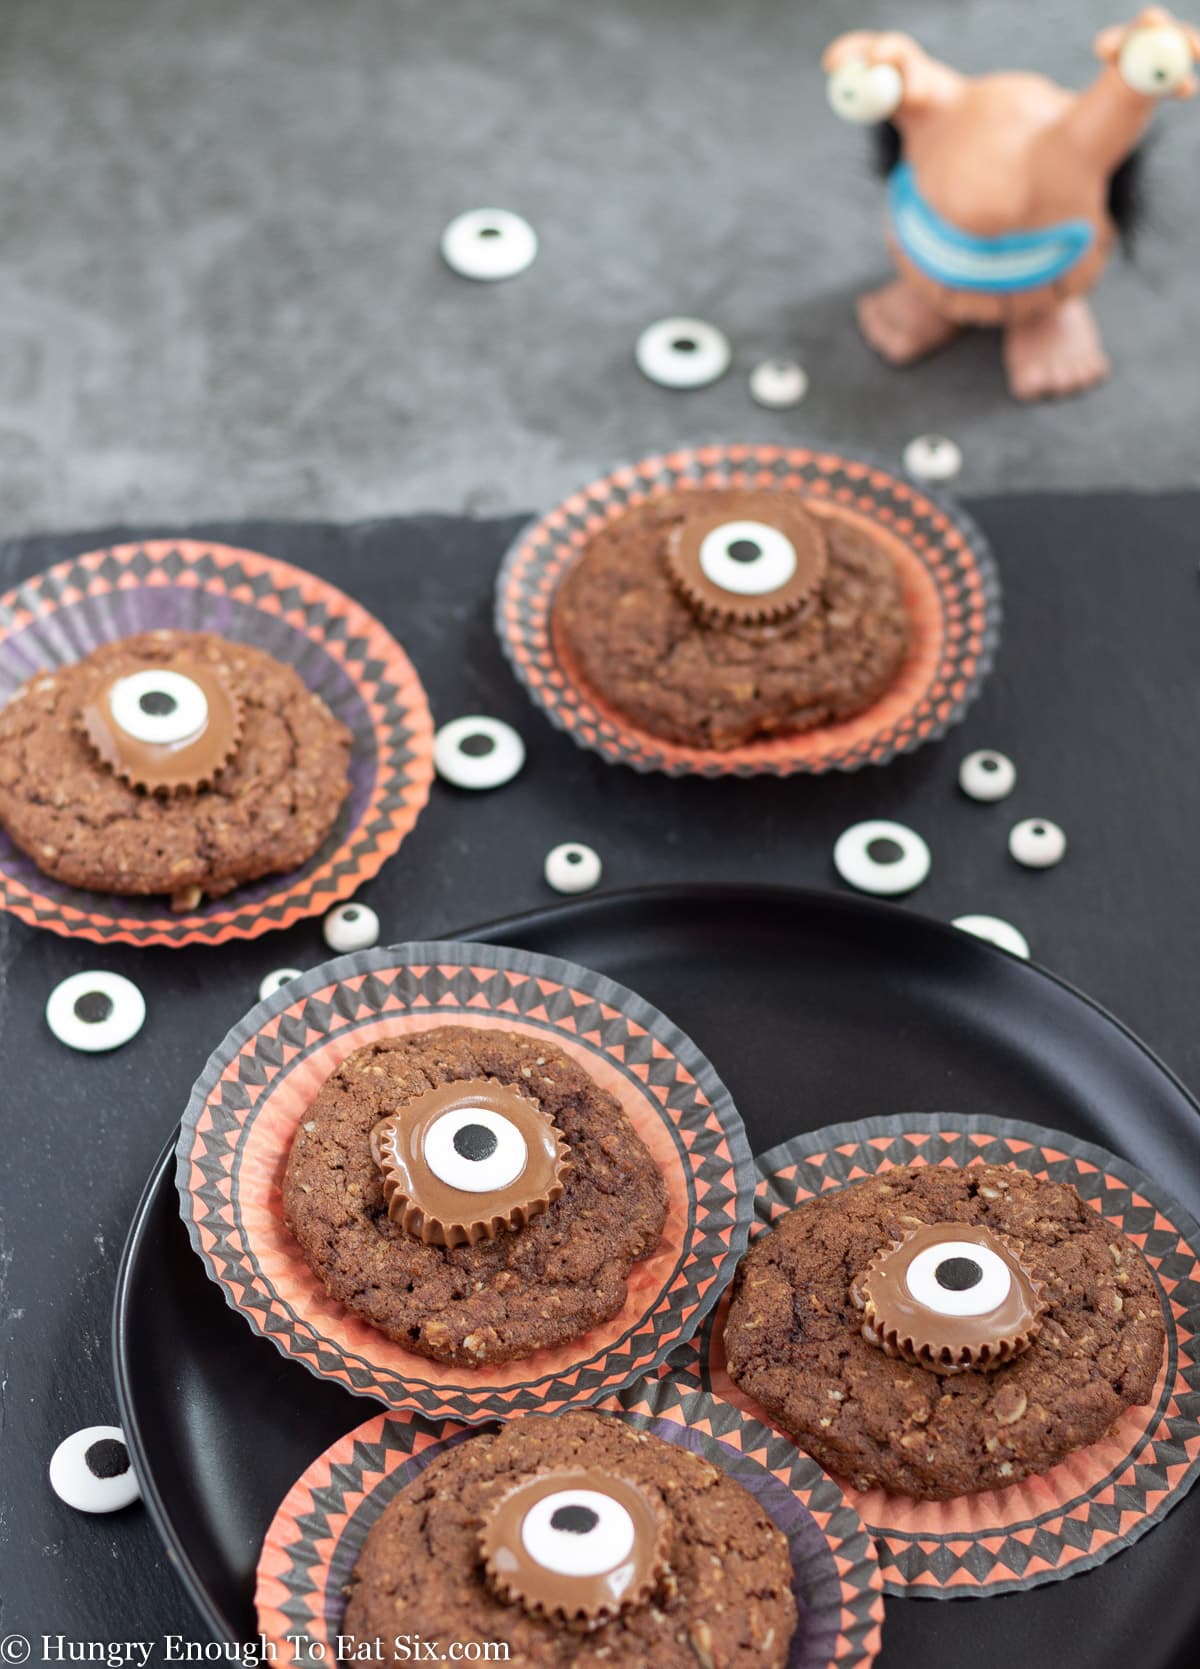 Chocolate cookies with candy eyes in the centers and scattered around